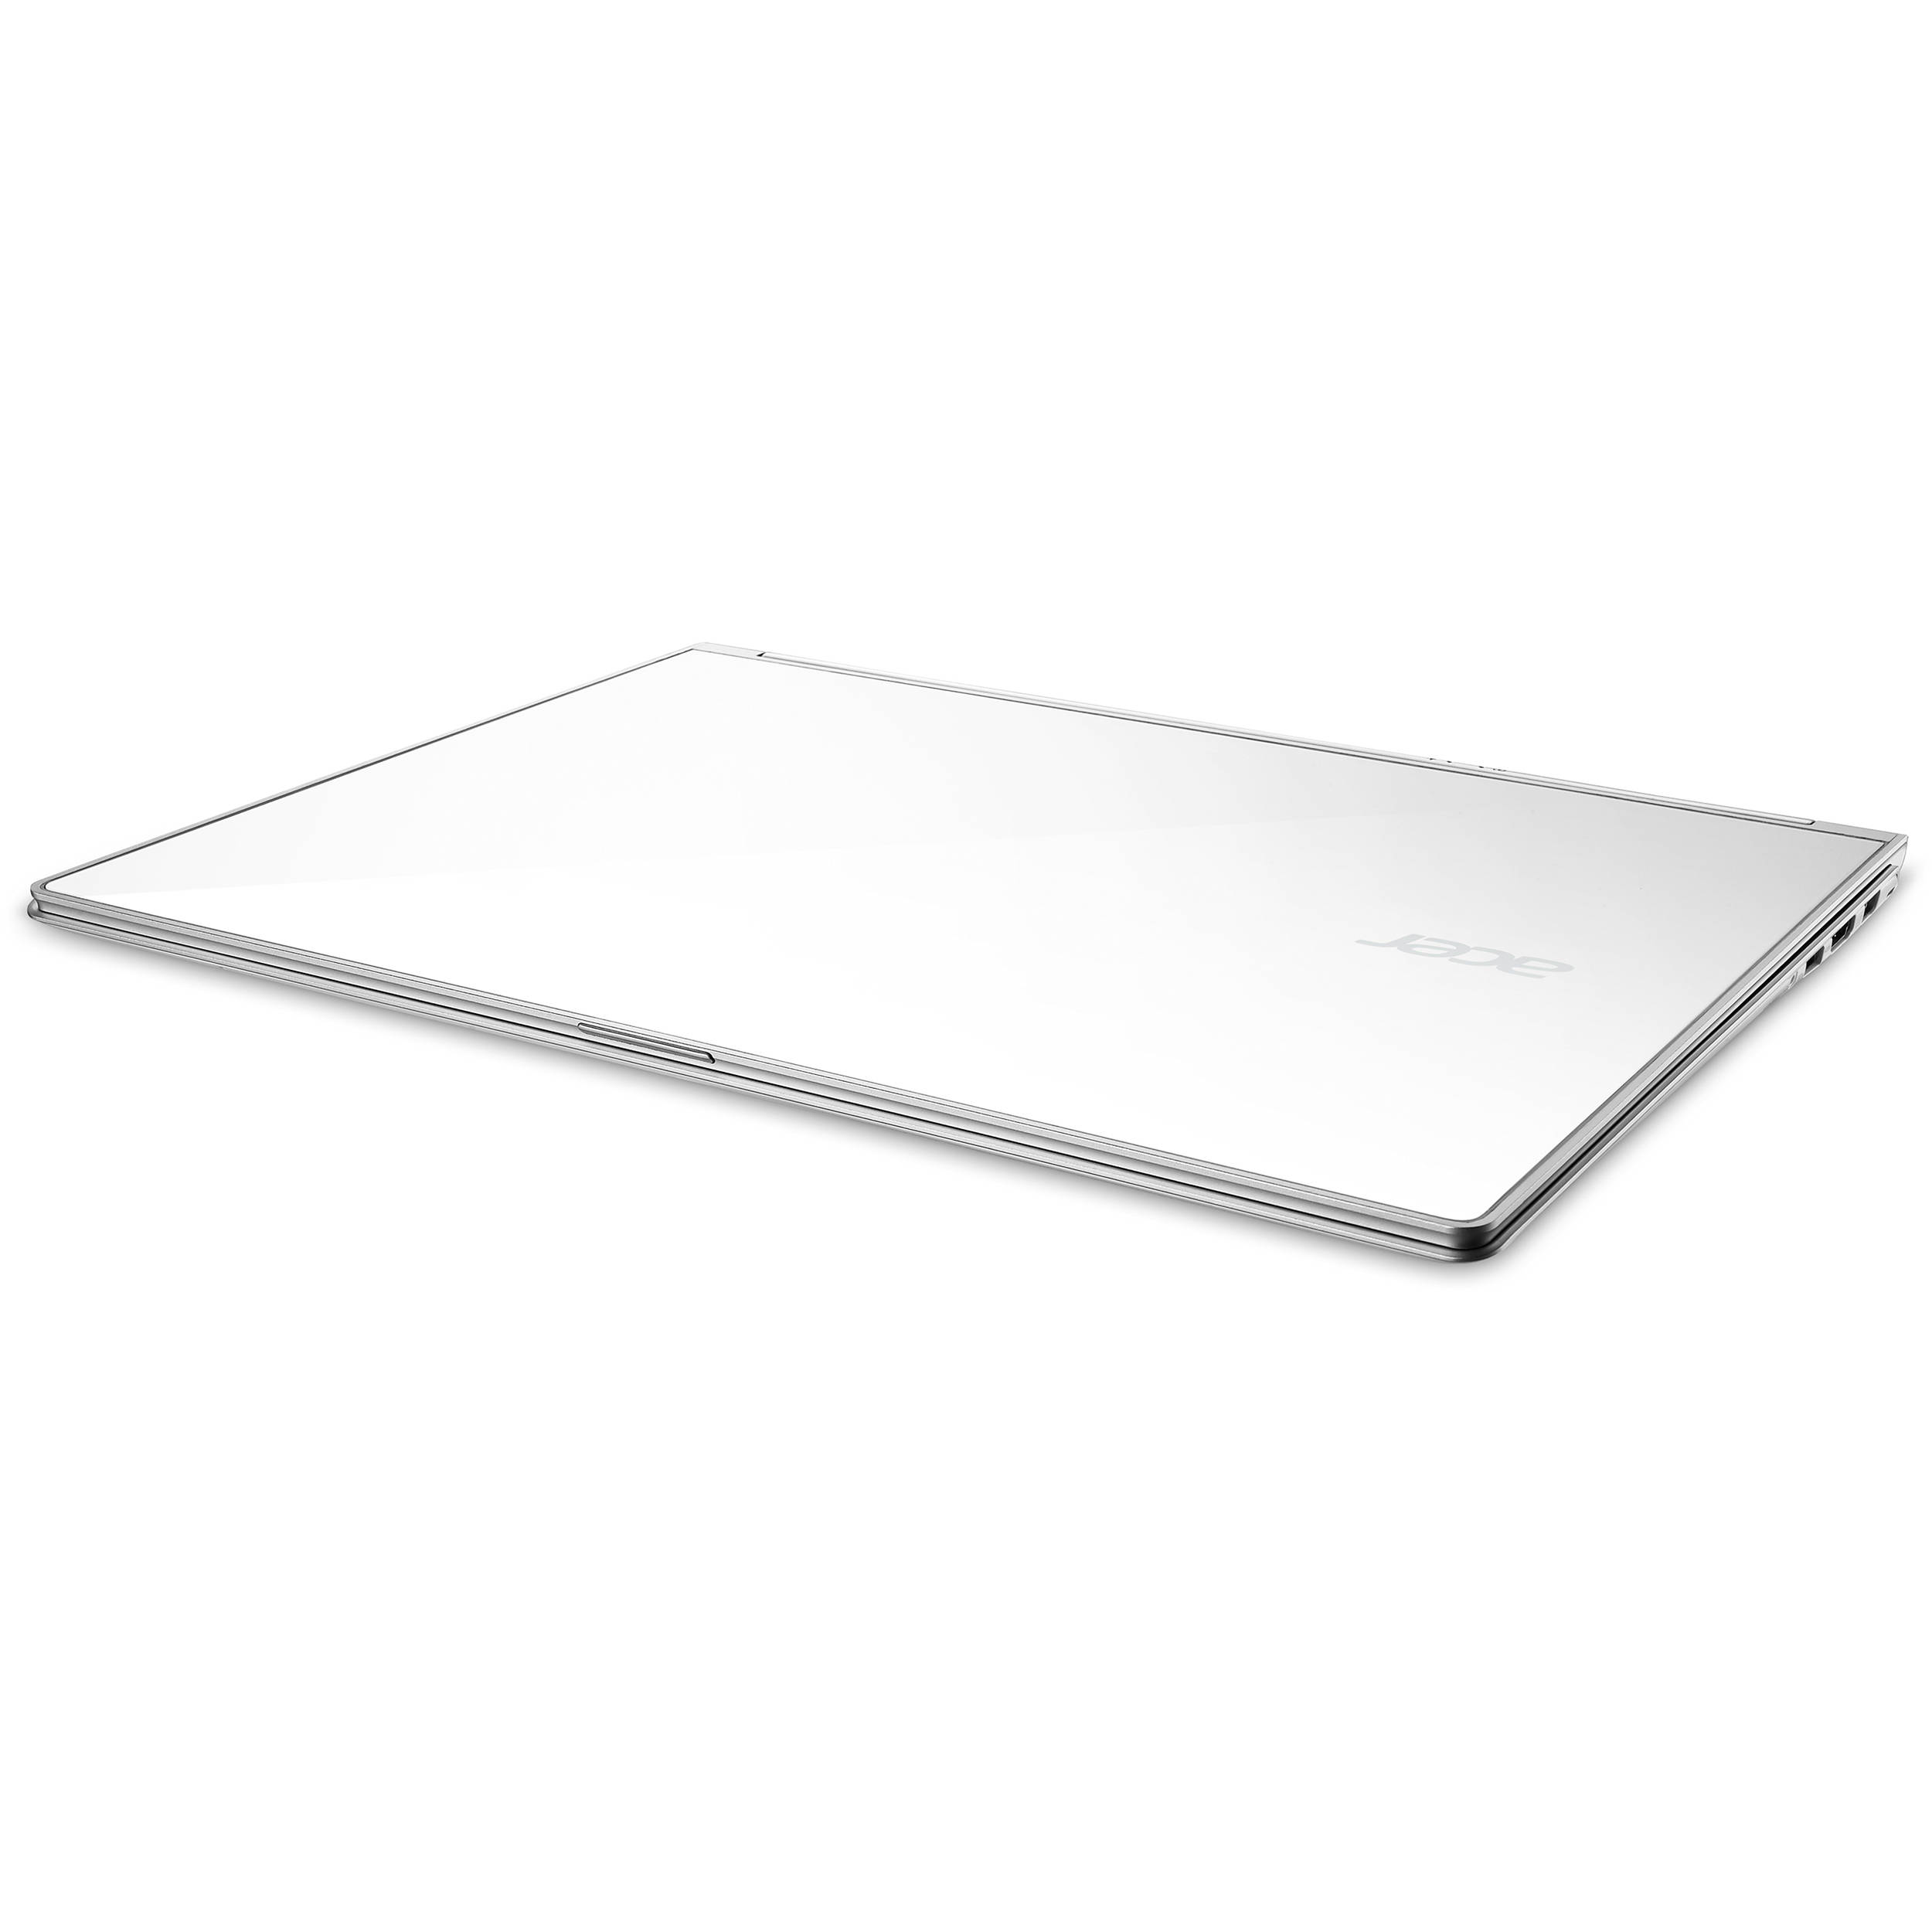 Acer Aspire S7 392 62 Multi Touch 13 3 Nx Mbkaa 008